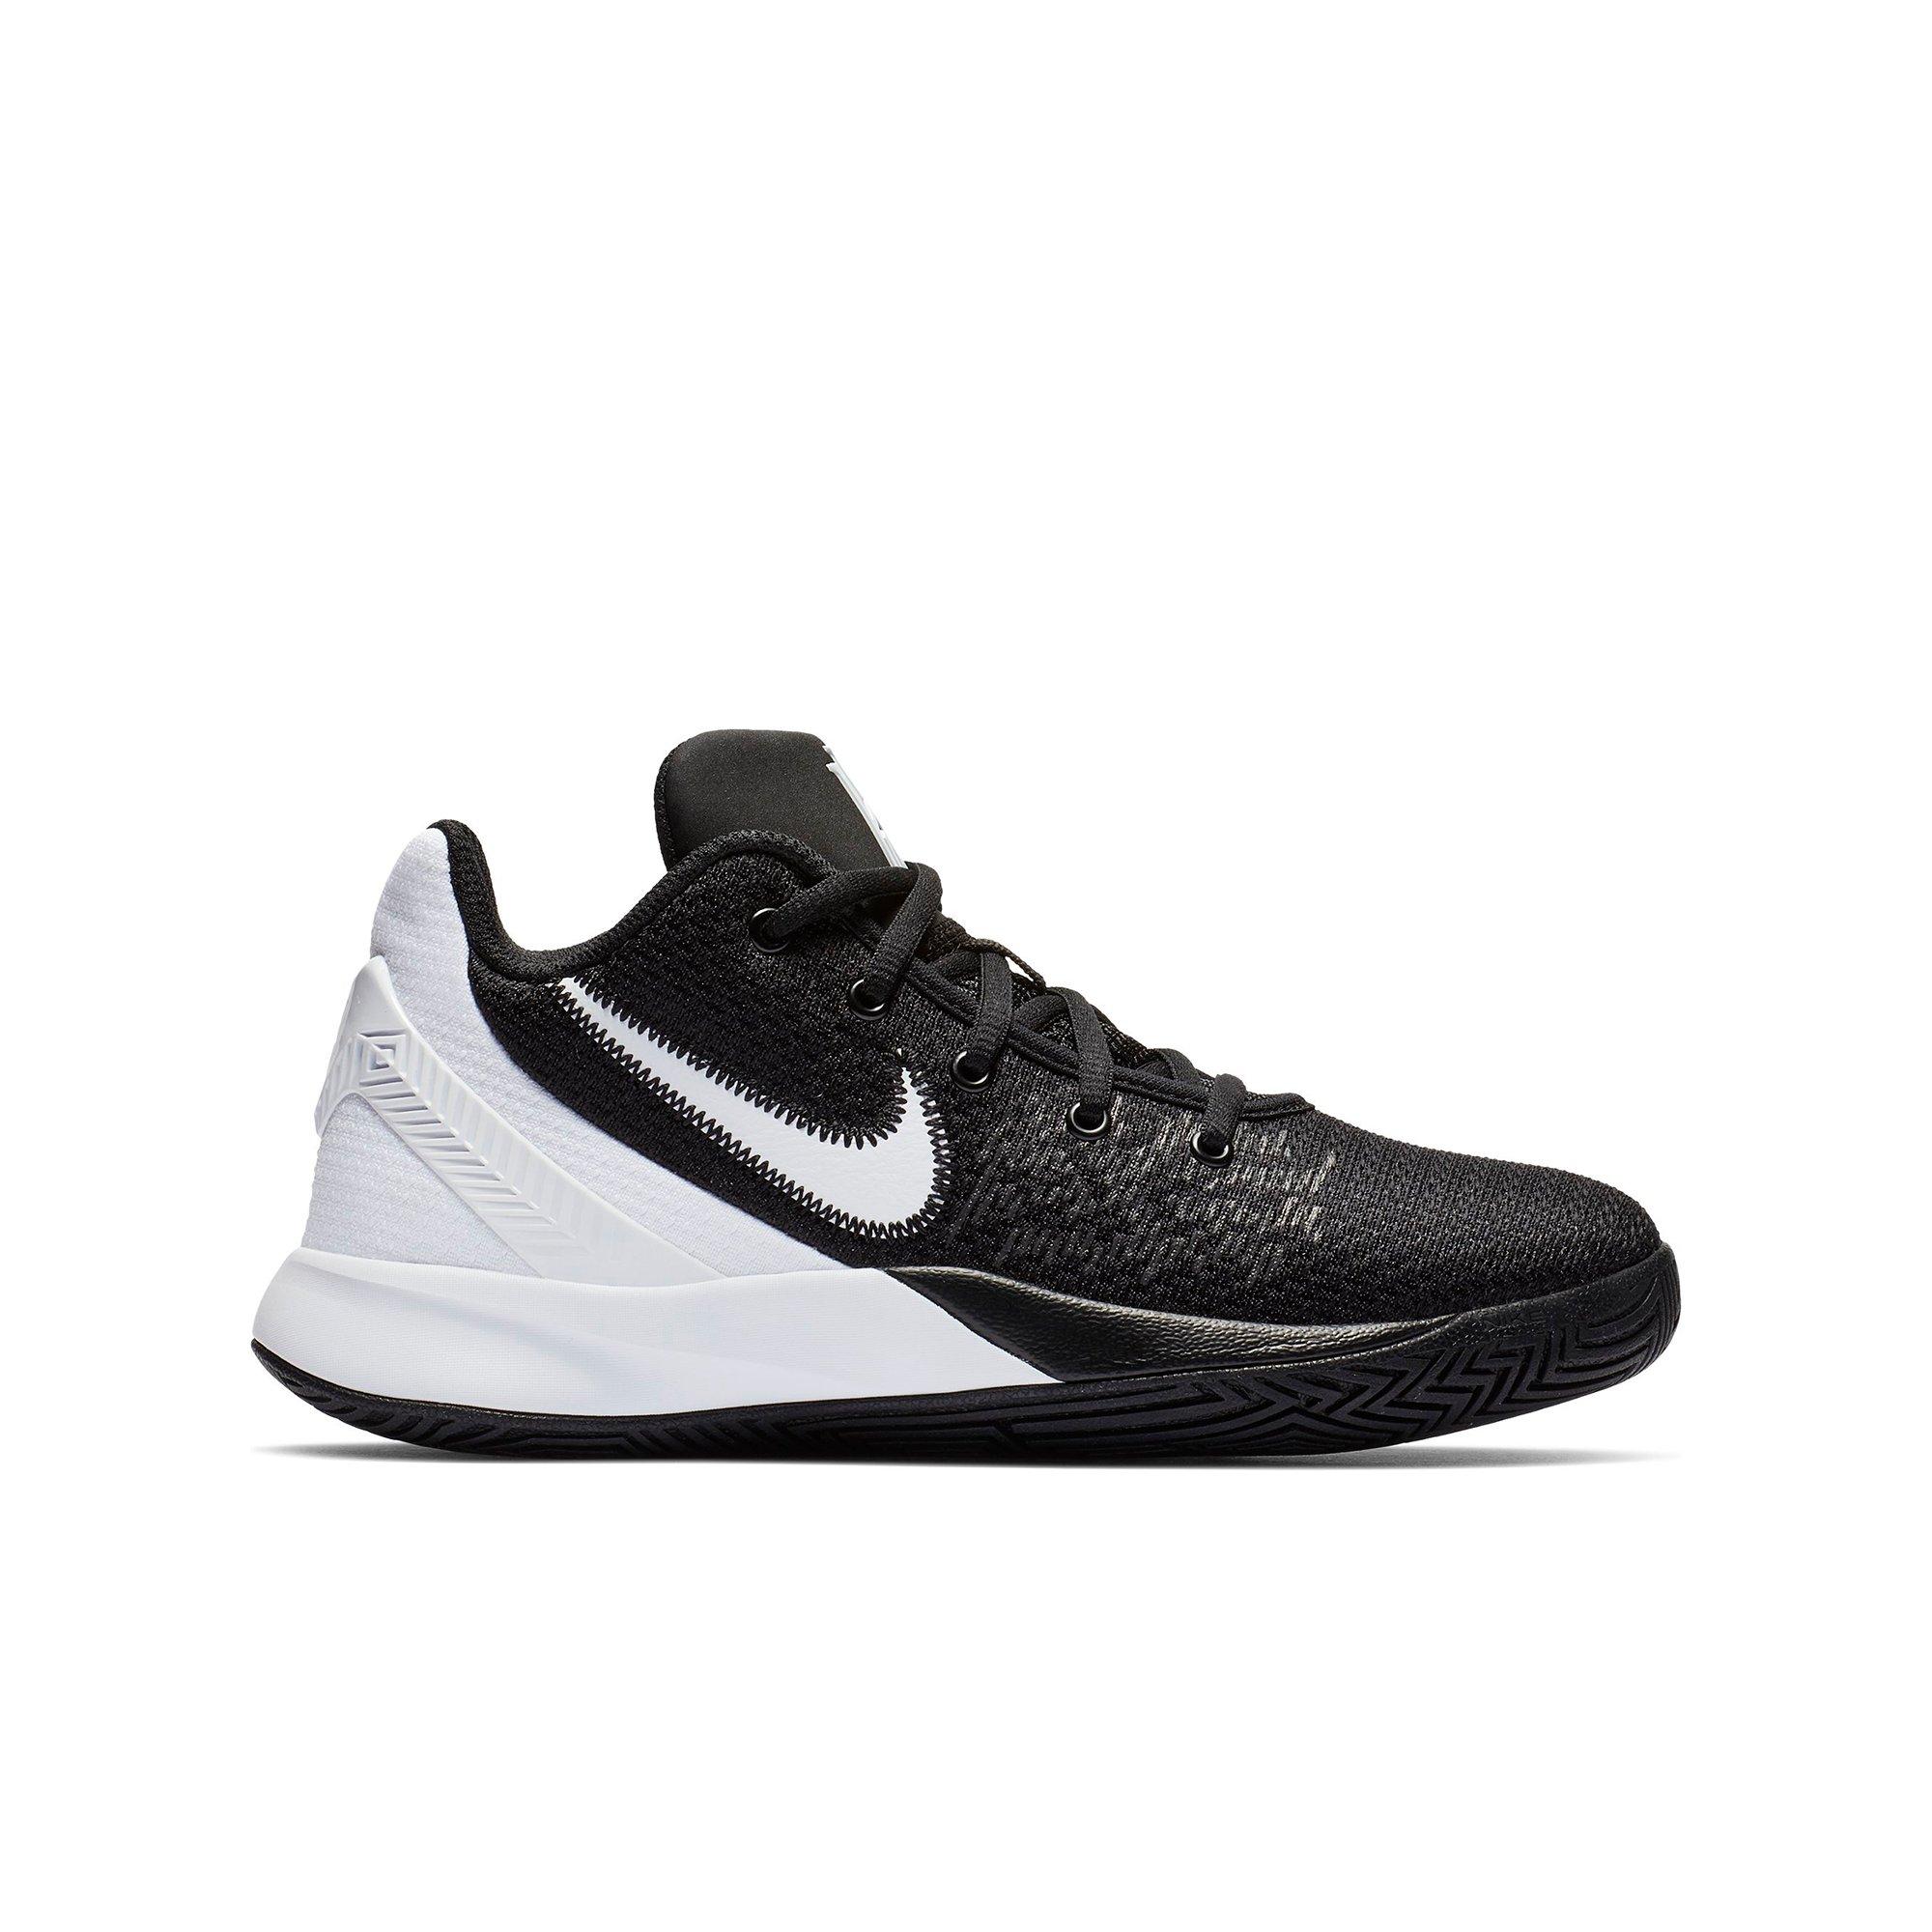 kyrie black and white shoes